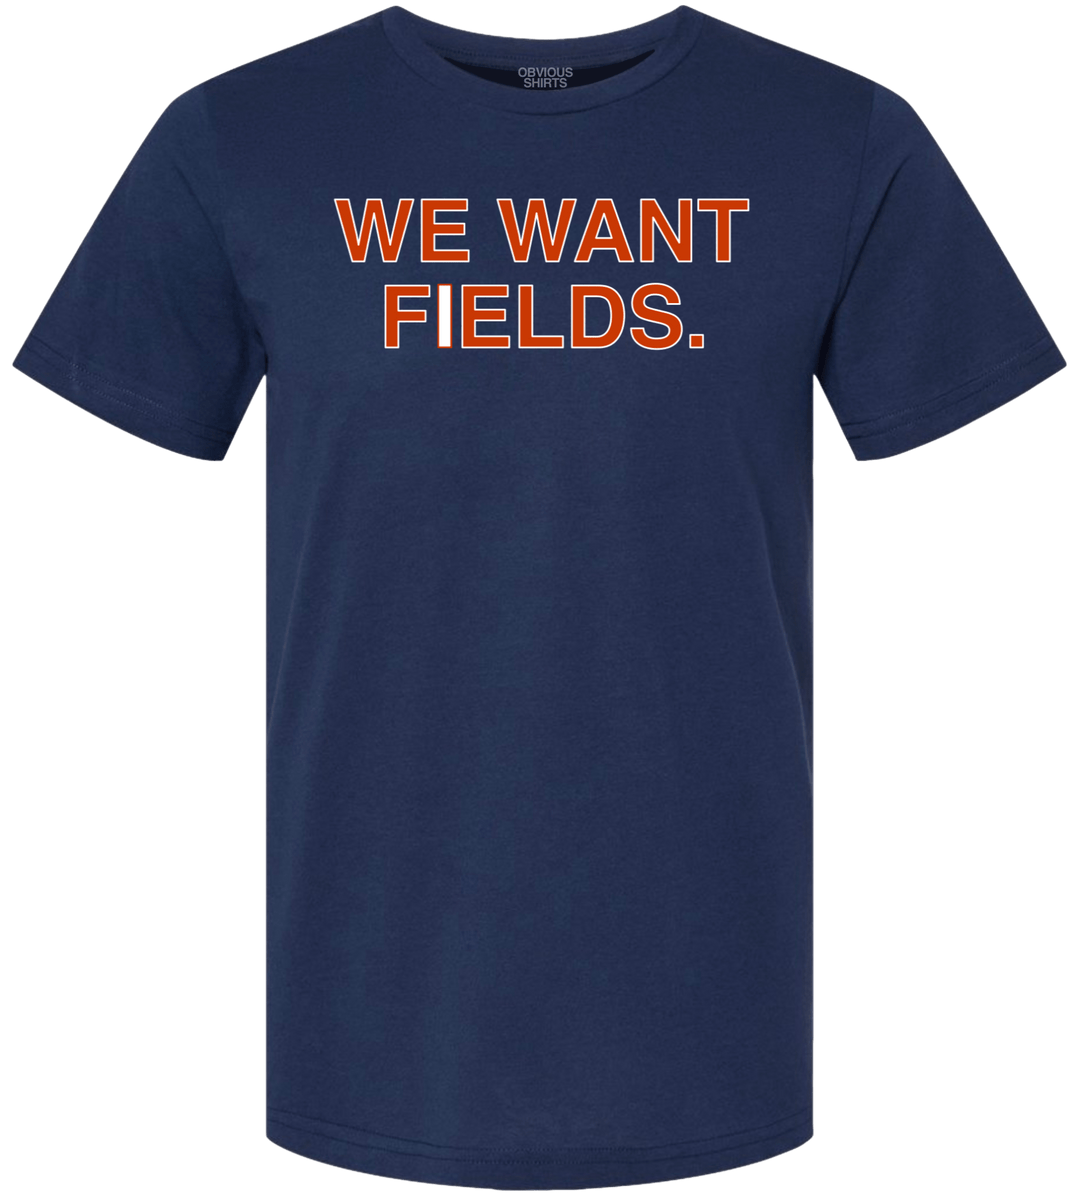 WE WANT FIELDS. - OBVIOUS SHIRTS